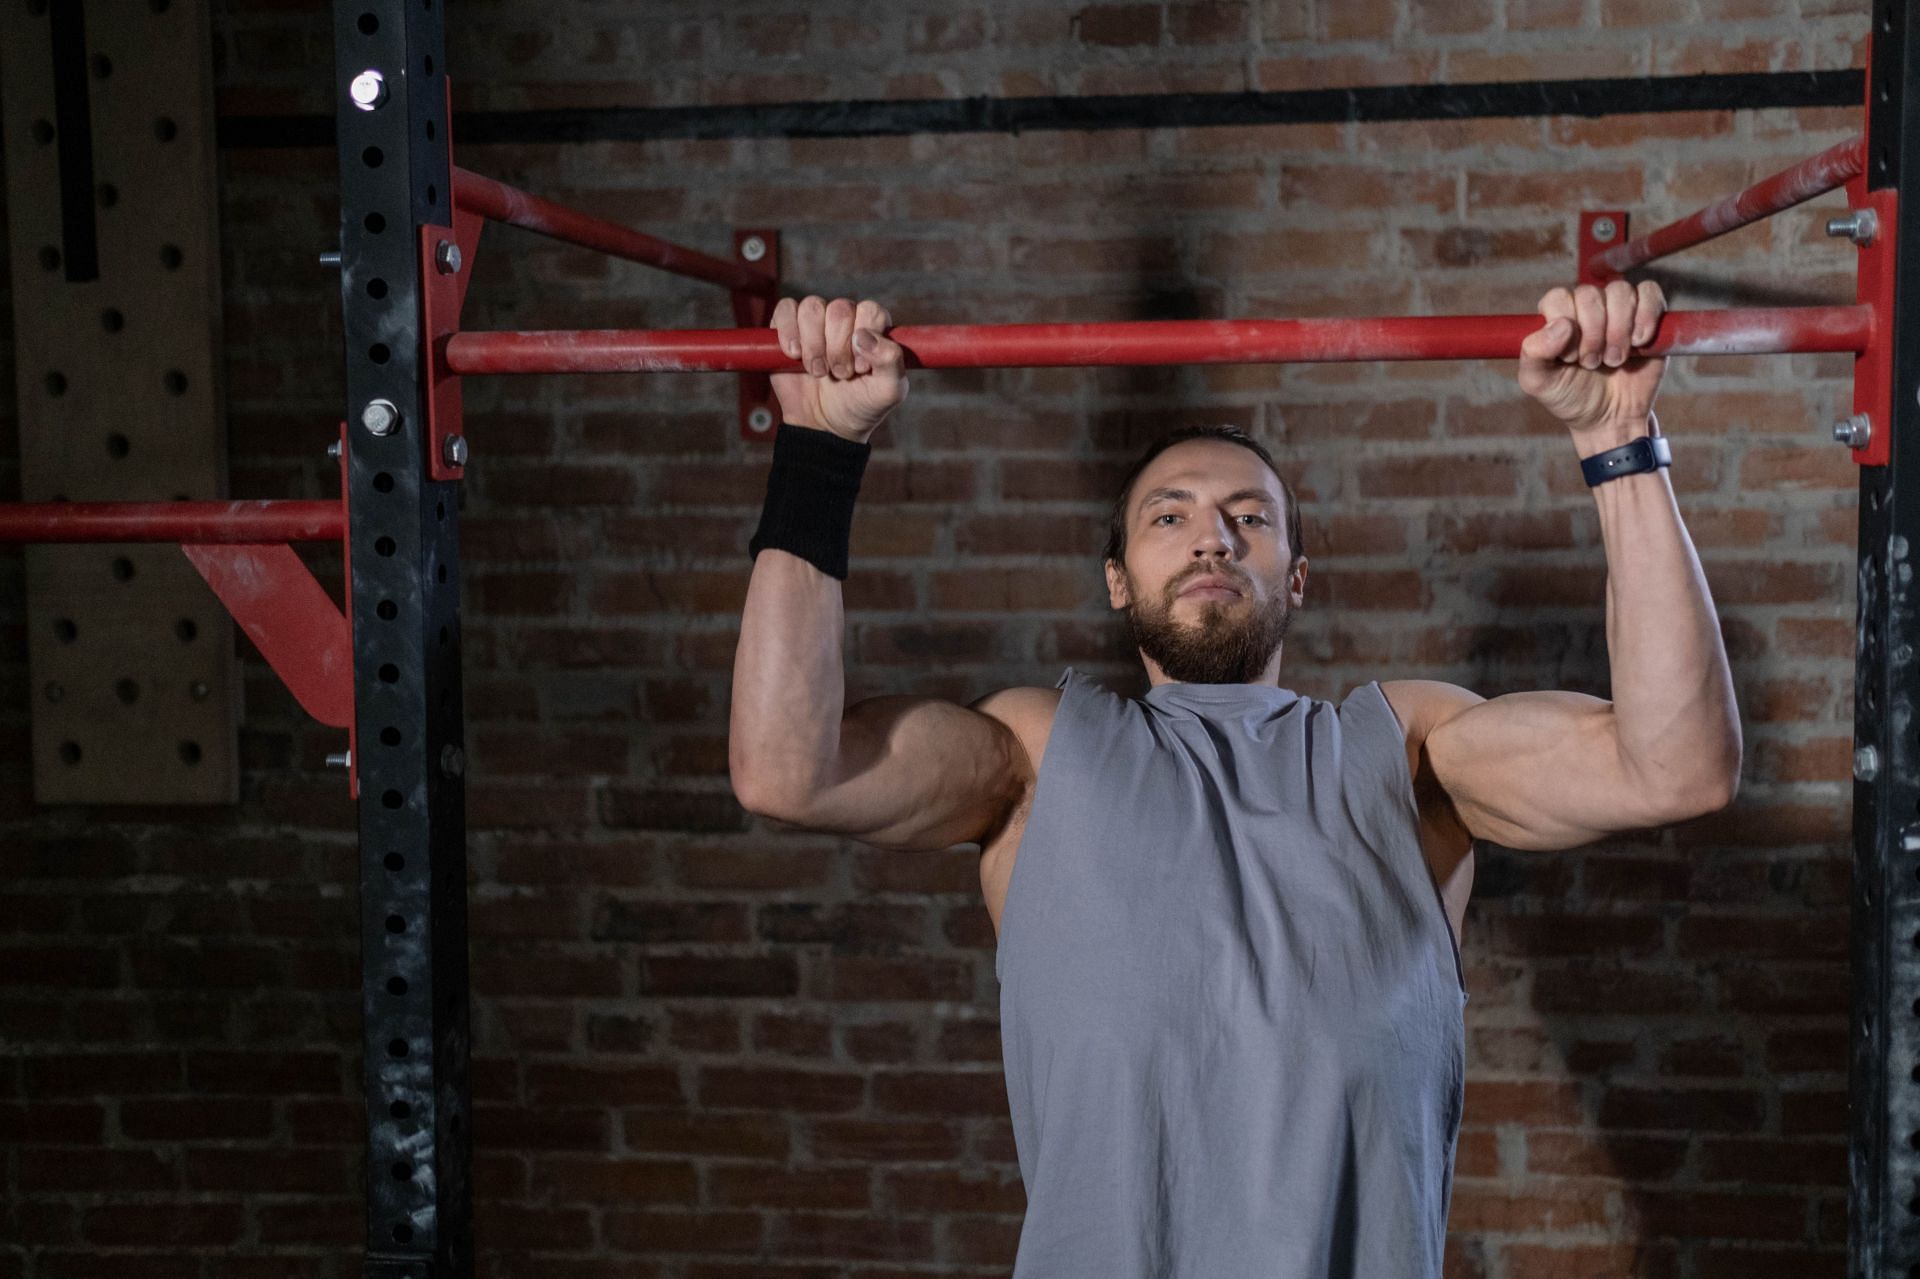 Pullups are a move that can be done practically anywhere. (Image via Pexels/Cottonbro)